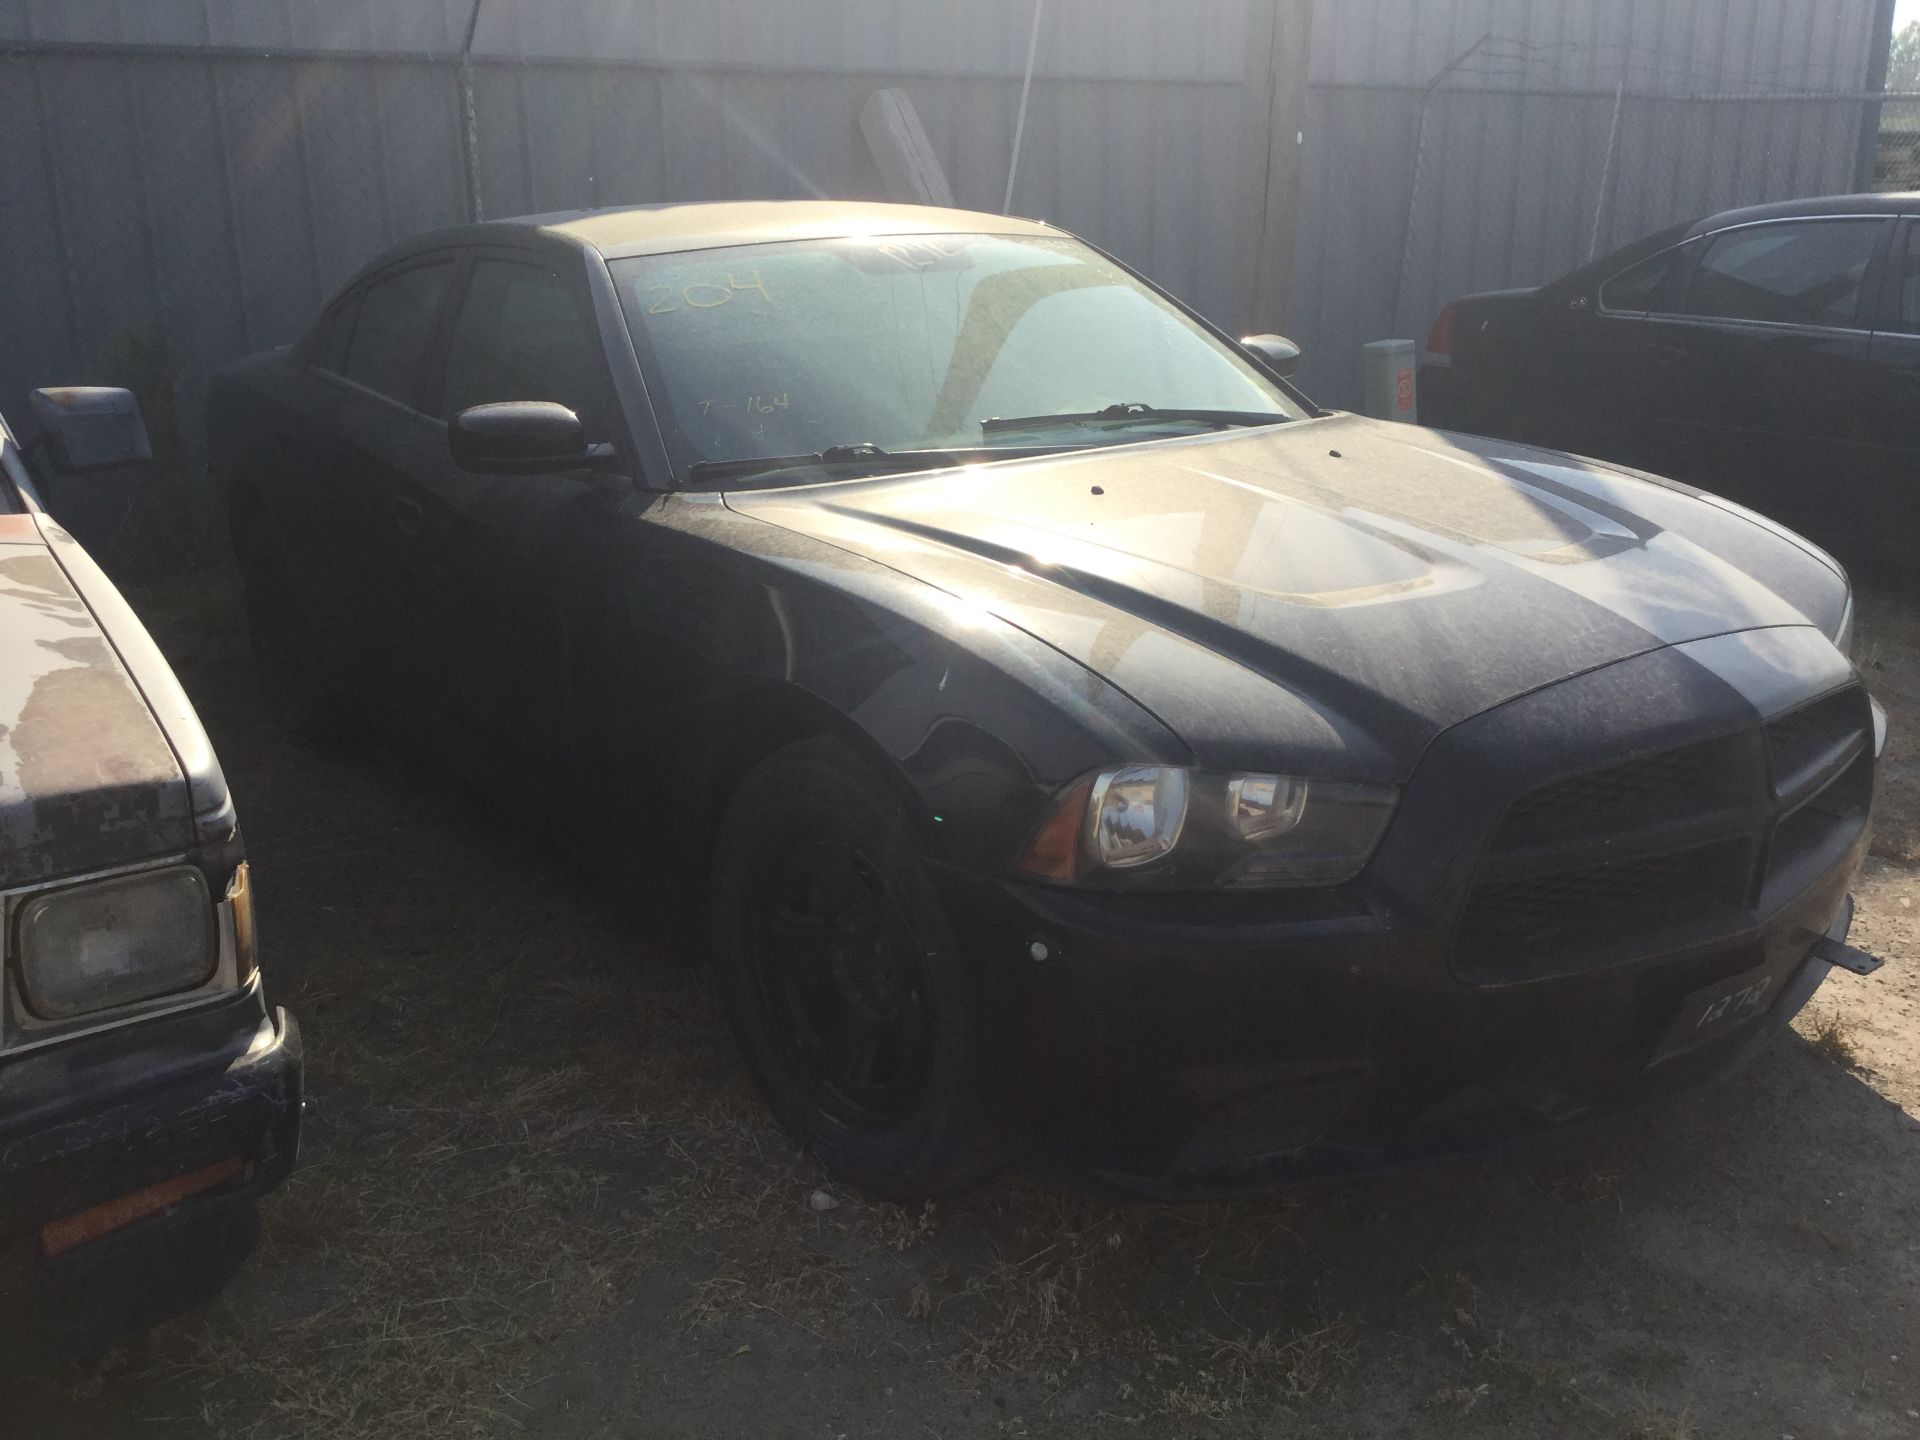 Year: 2012 Make: Dodge Model: Charger Type: Sedan Vin#: 234161 Mileage/Hours: 103568 5.7L, Auto, - Image 3 of 4